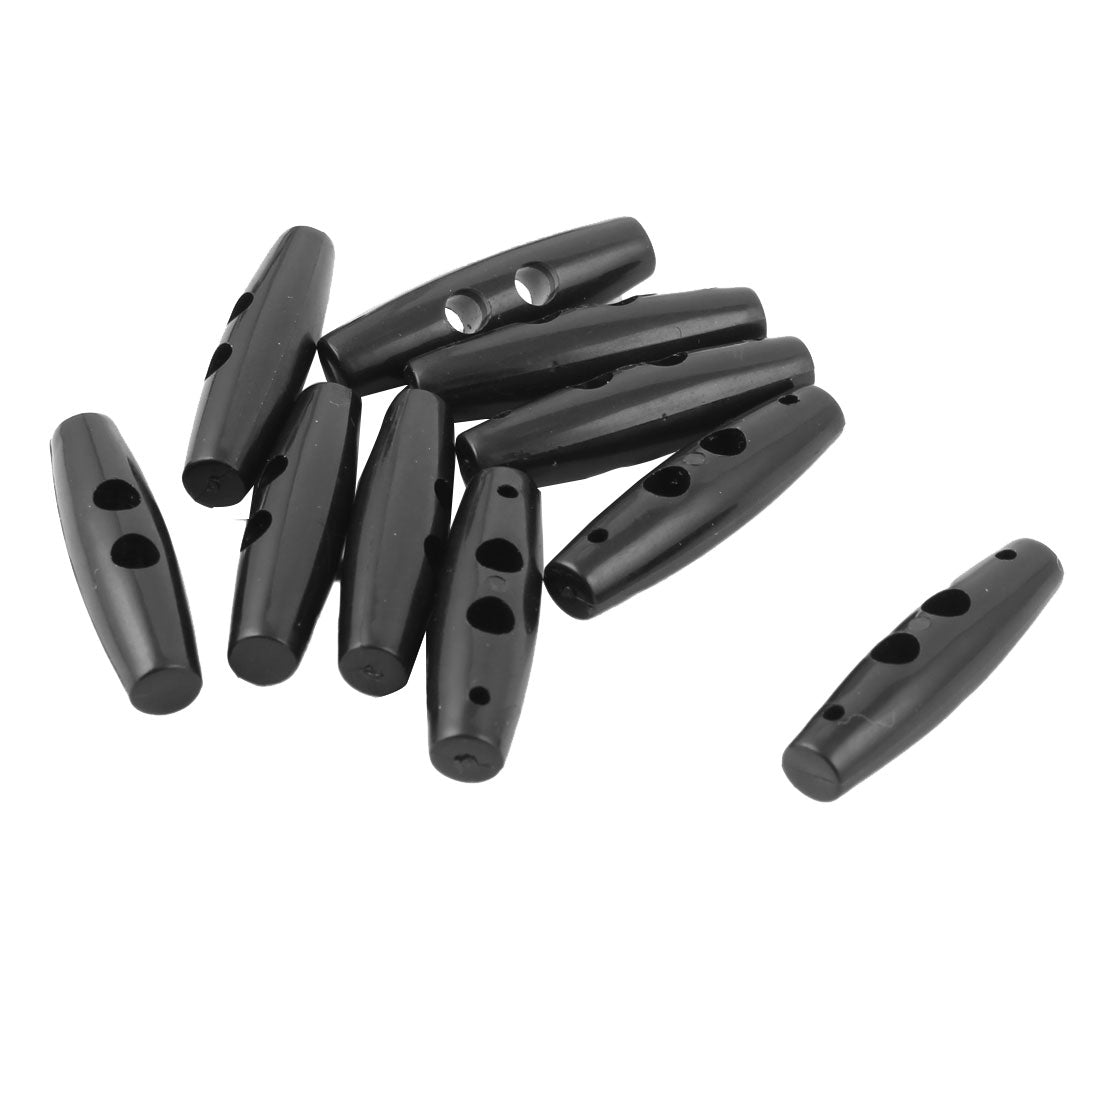 uxcell Uxcell Plastic 2 Holes Scrapbooking Sewing Toggle Buttons Adjustive Lock Black 10pcs